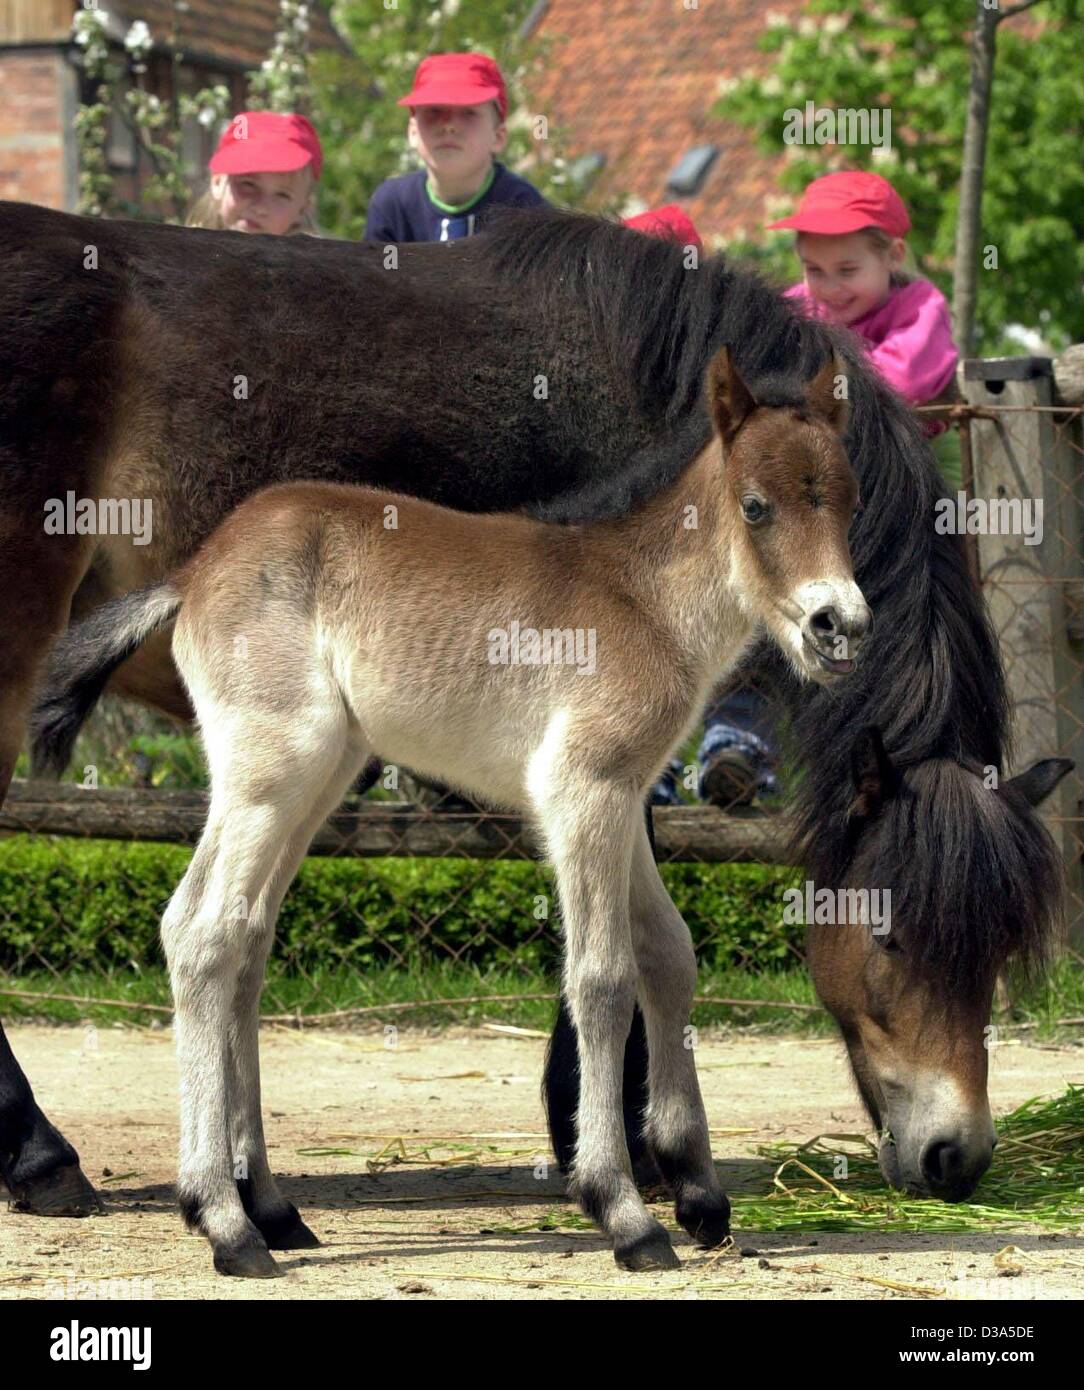 (dpa) - Closely watched by its mother Marie, three-day-old male foal Carlchen explores the enclosure at the Hanover zoo, 13 May 2002. Exmore ponies live in the wild in Great Britain, but are an endangered species. Only 800 animals worldwide remain of the direct descendants of the ice age ponies. Stock Photo